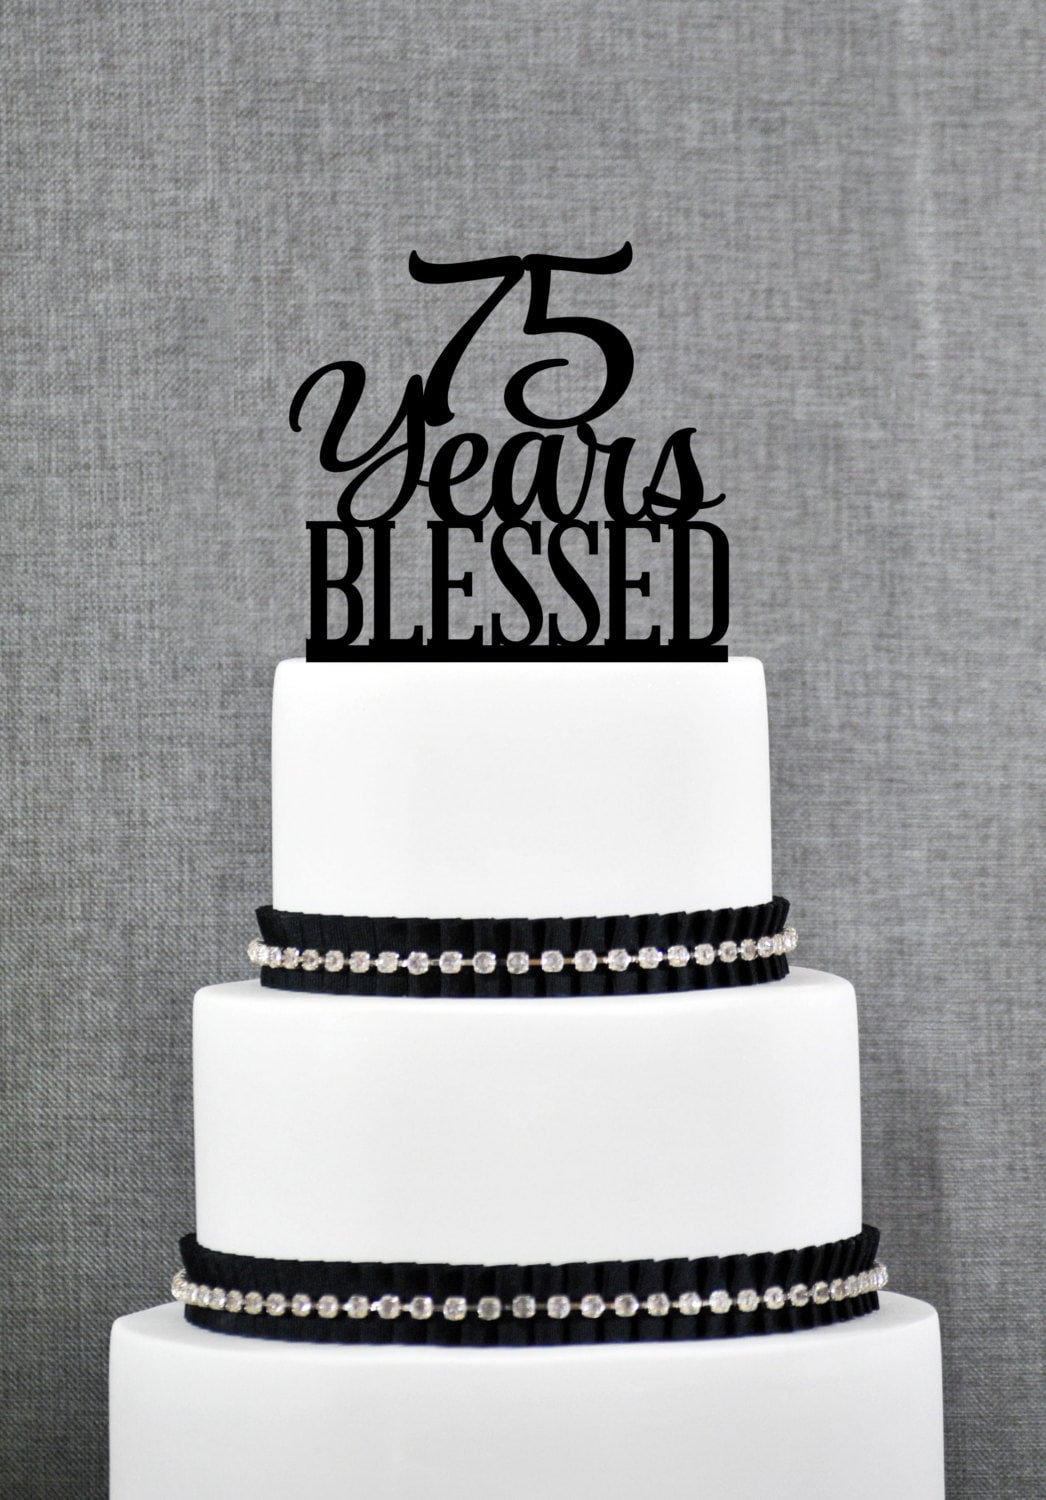 Personalized 75 Years Blessed Cake Topper 75th Birthday Cake Etsy